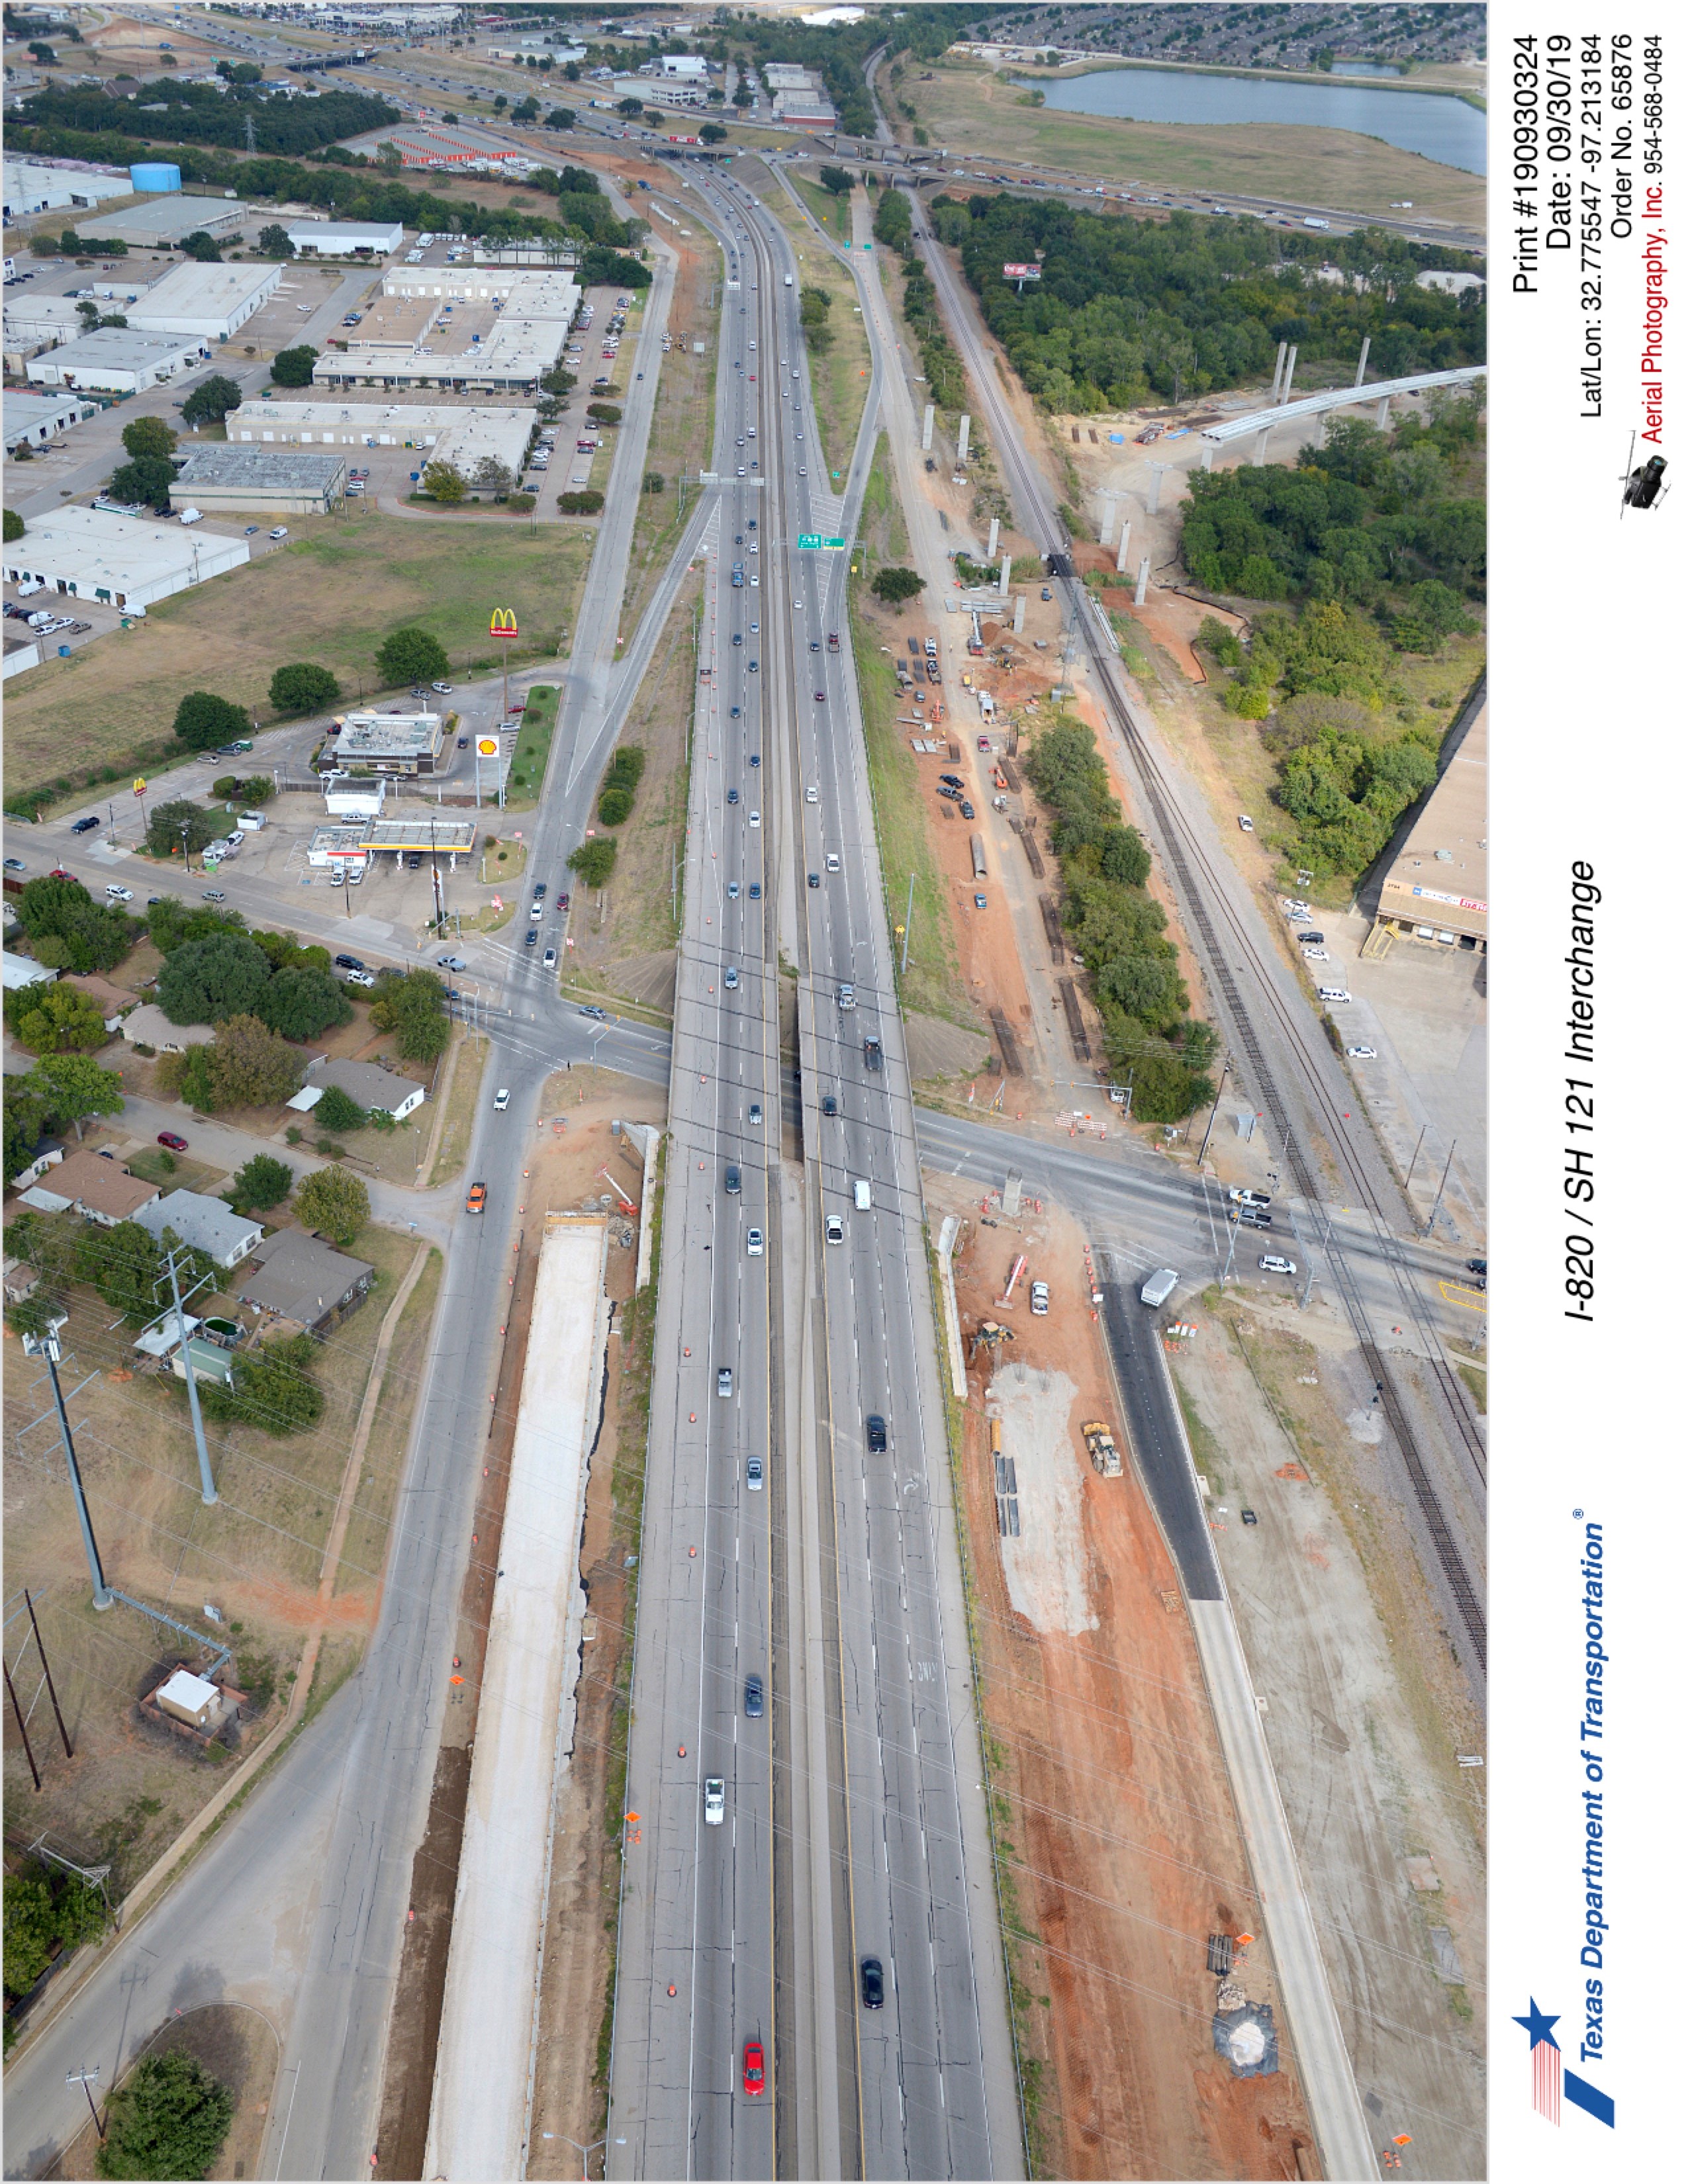 SH 121 looking northeast over Handley-Ederville Rd intersection. Construction on north and south side of SH 121 west of Handley-Ederville Rd and bridge construction over northbound frontage road east of Handley-Ederville Rd.